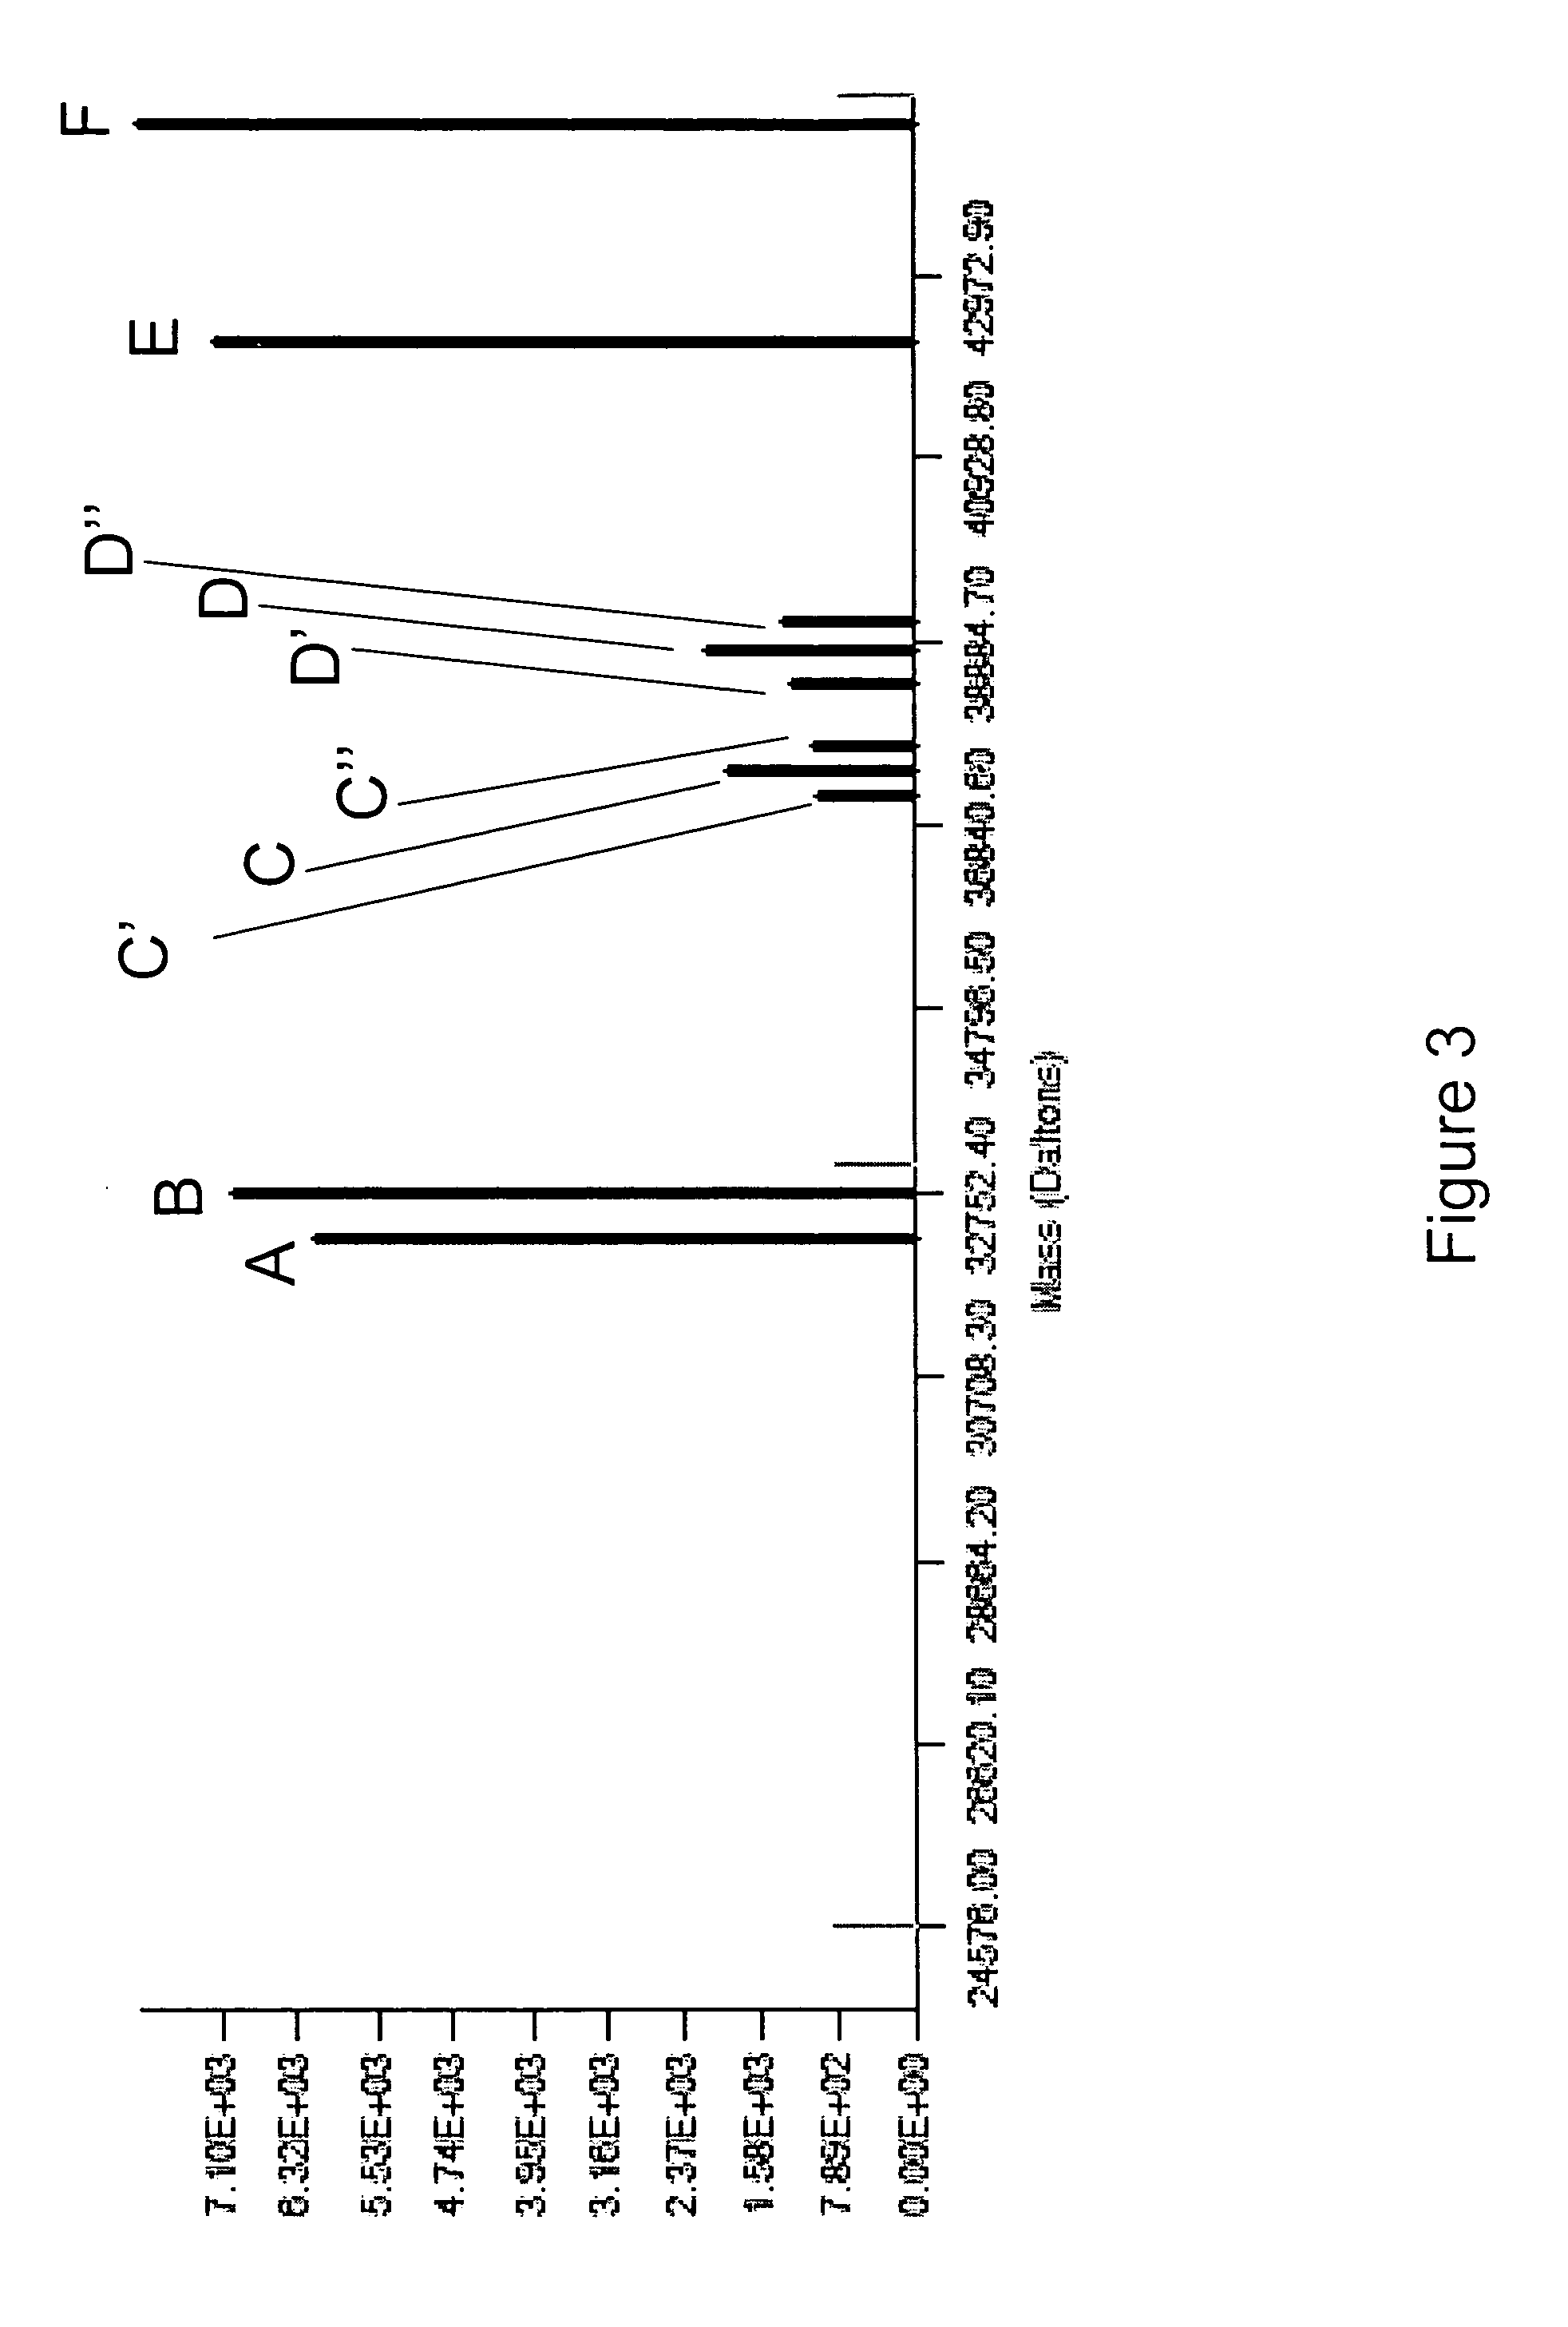 Methods for rapid identification and quantitation of nucleic acid variants